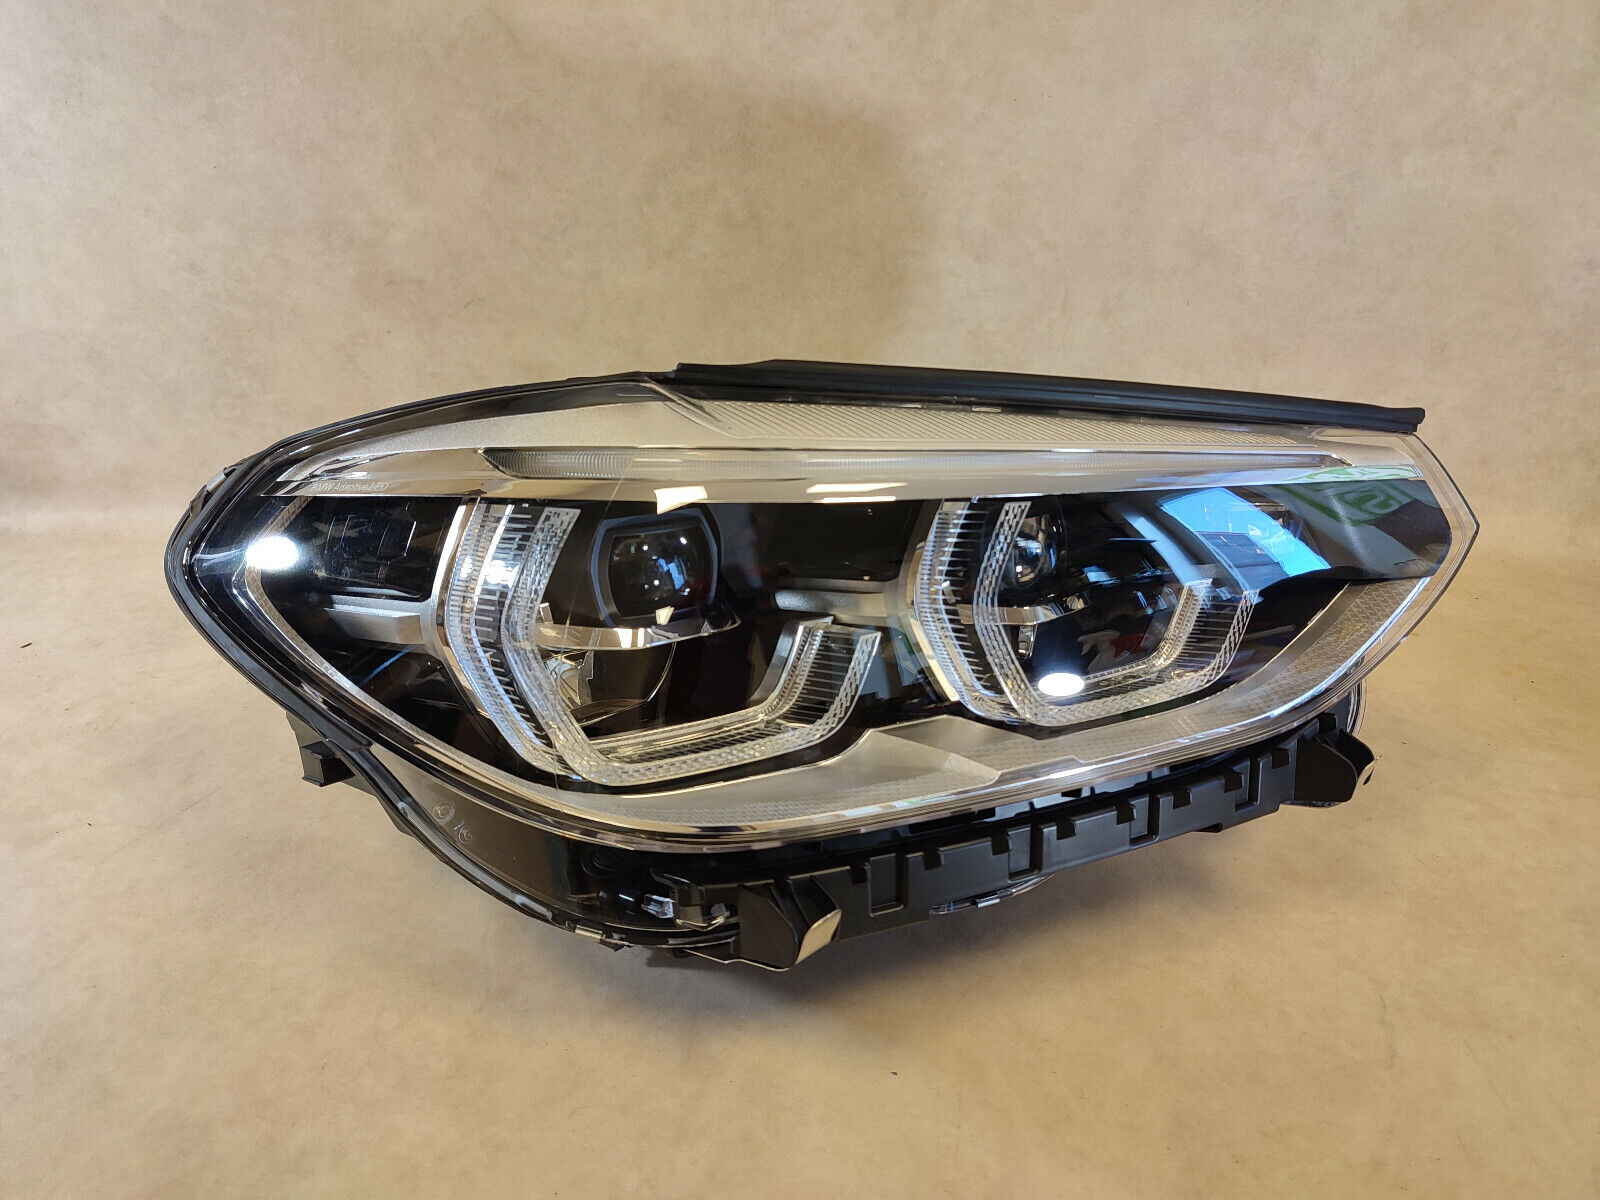 LED Headlight BMW X3 X4 Right Front for sale online | eBay